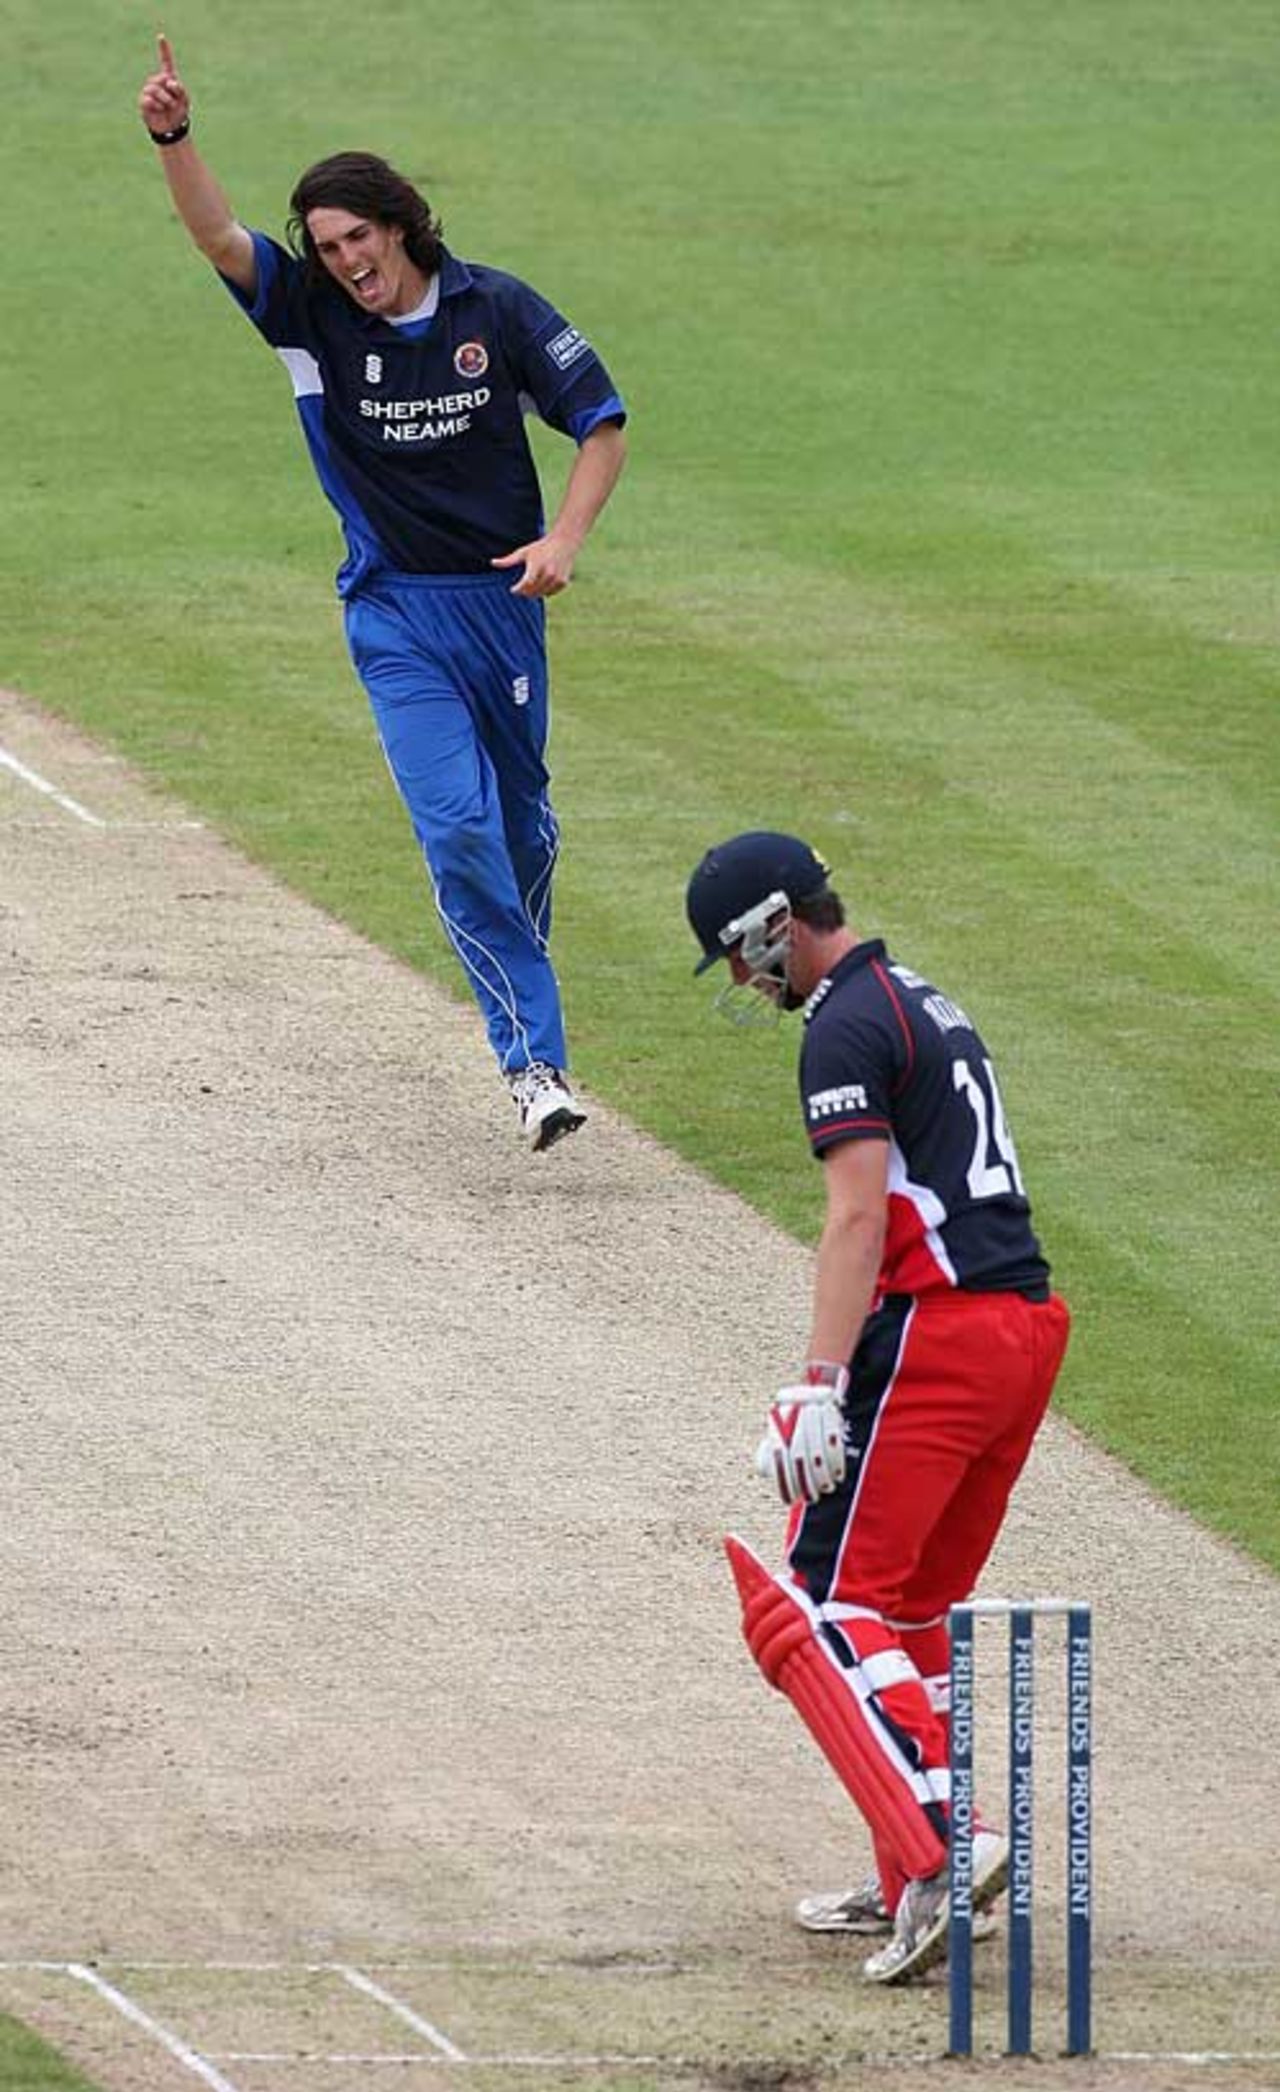 Chris Wright removes Tom Smith as Lancashire struggle early, Lancashire v Essex, Friends Provident Trophy quarter-final, Old Trafford, May 23, 2009